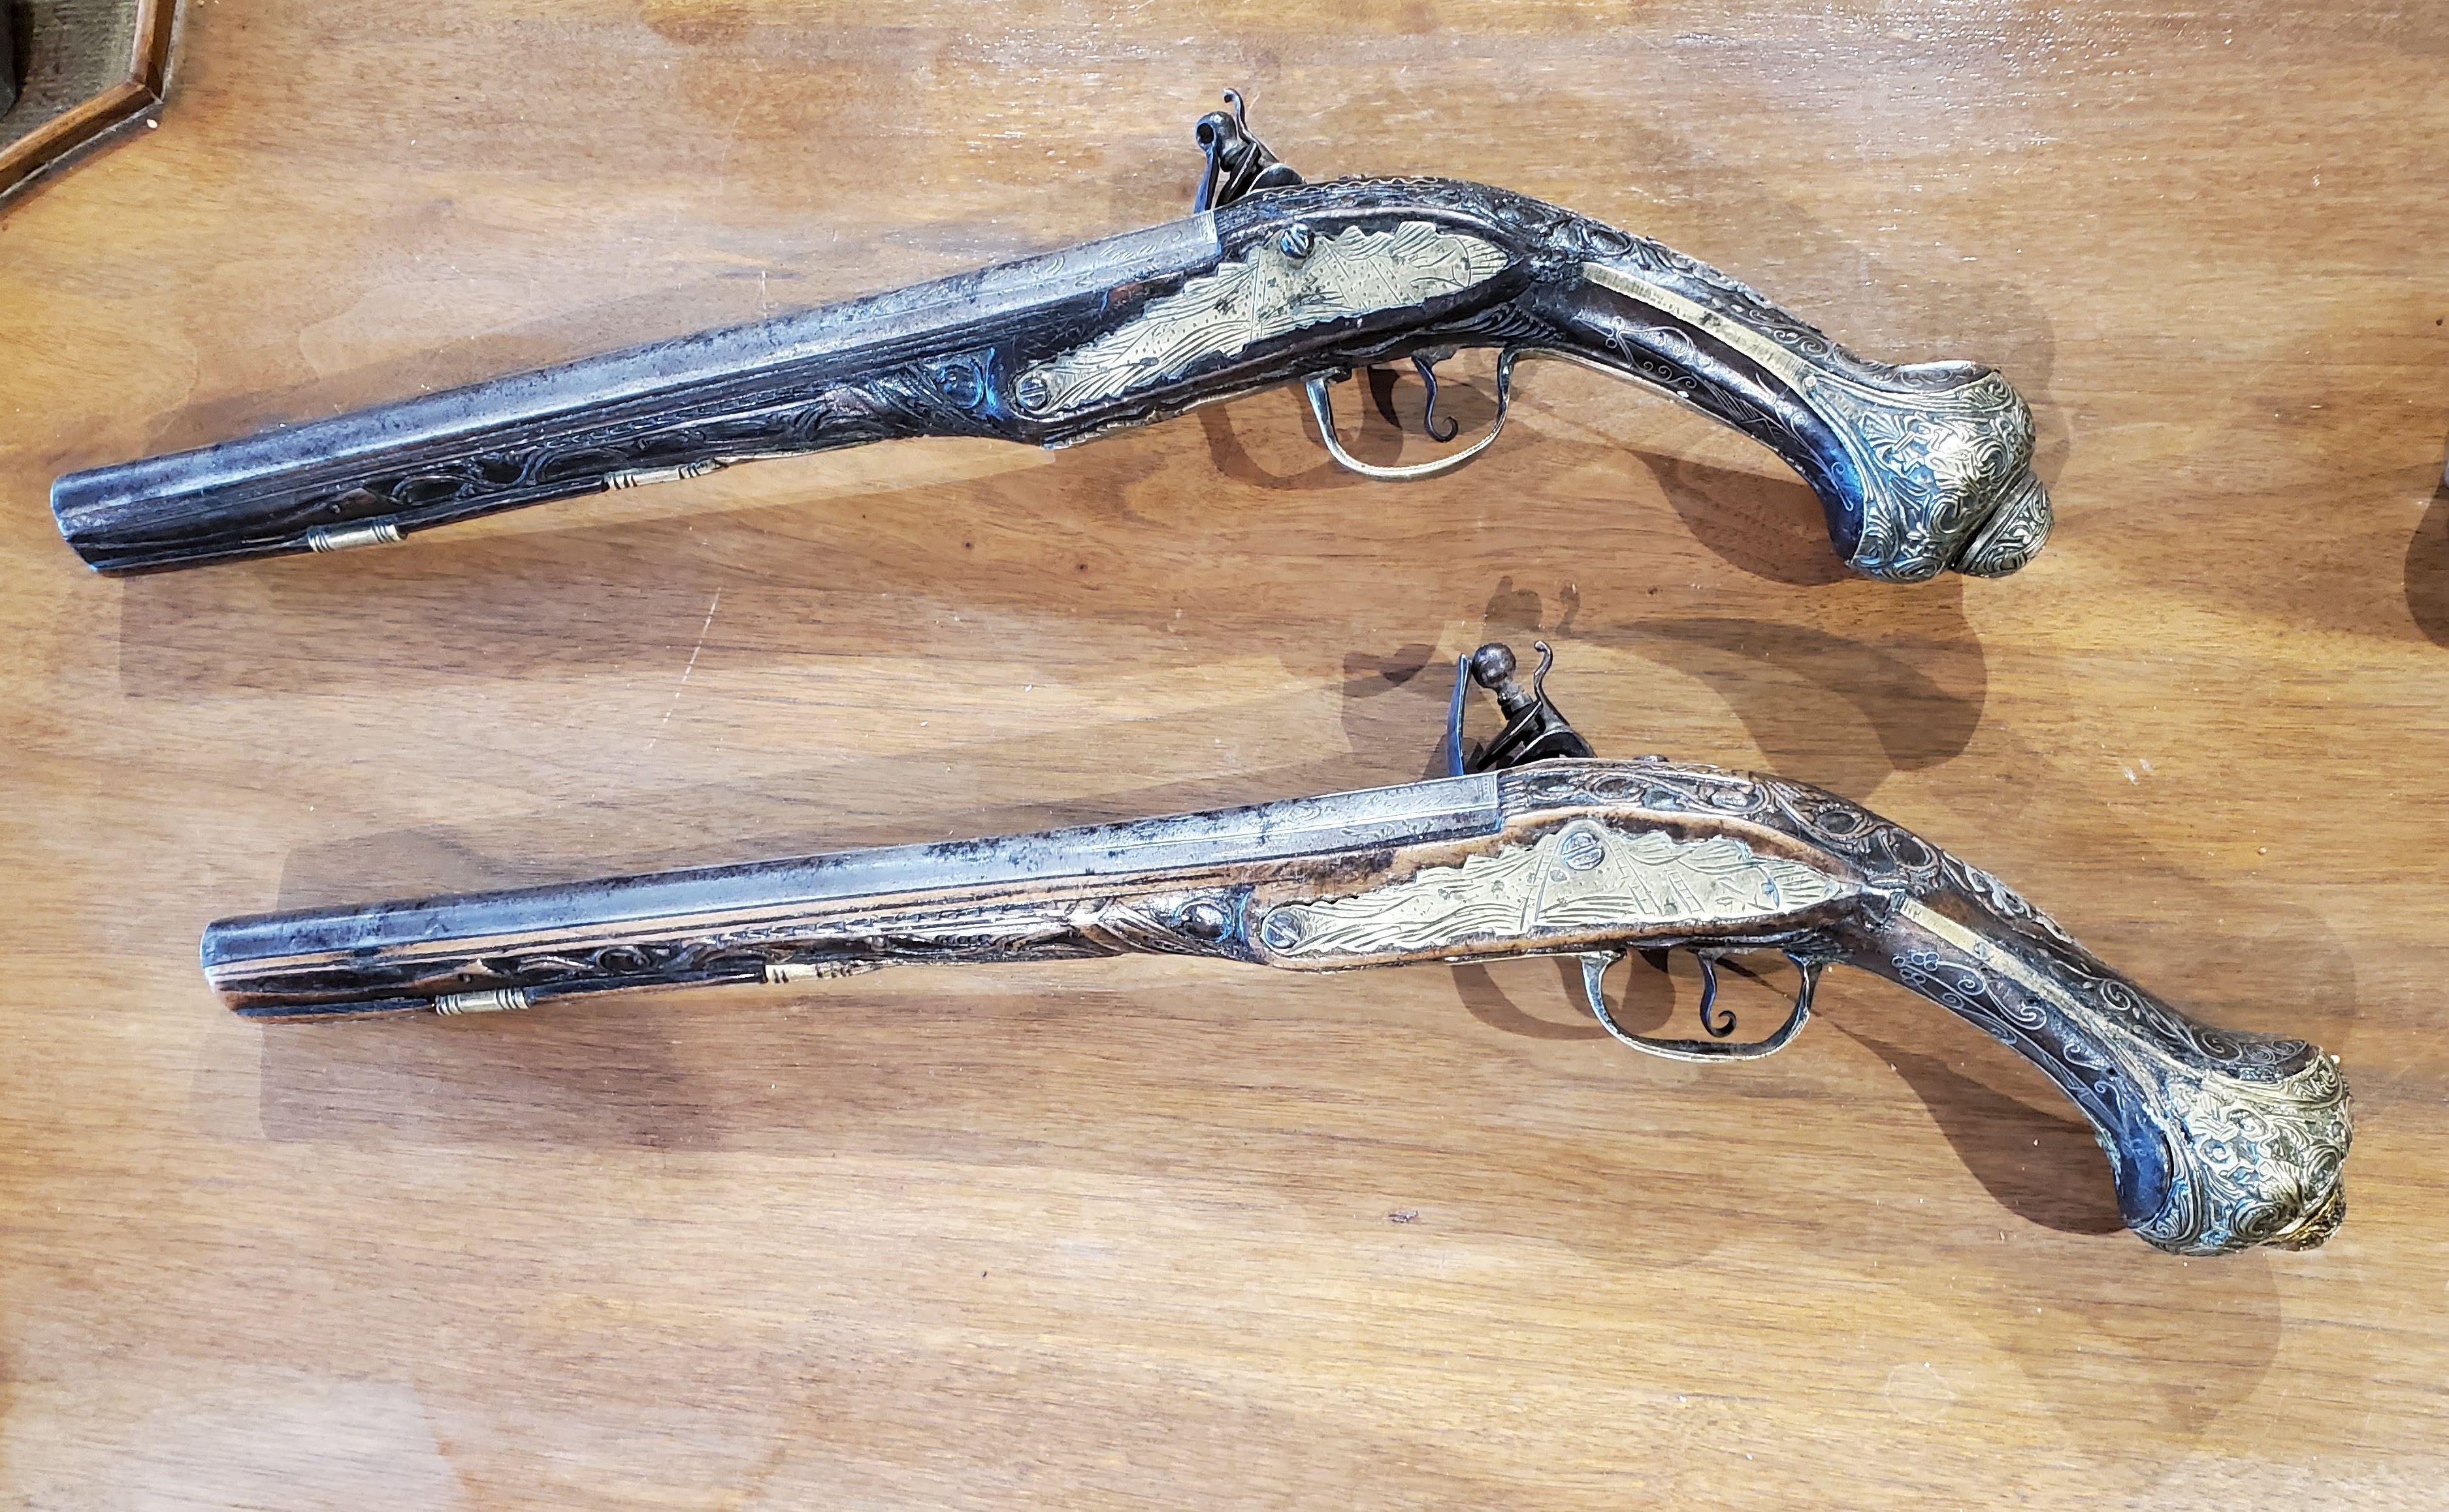 These extremely rare early 18th century flintlock pistols showcase extraordinary craftsmanship with carved walnut stocks inlaid with silver and brass. Intricately etched steel barrels and retaining the original goatskin holster. 

Made in Turkey